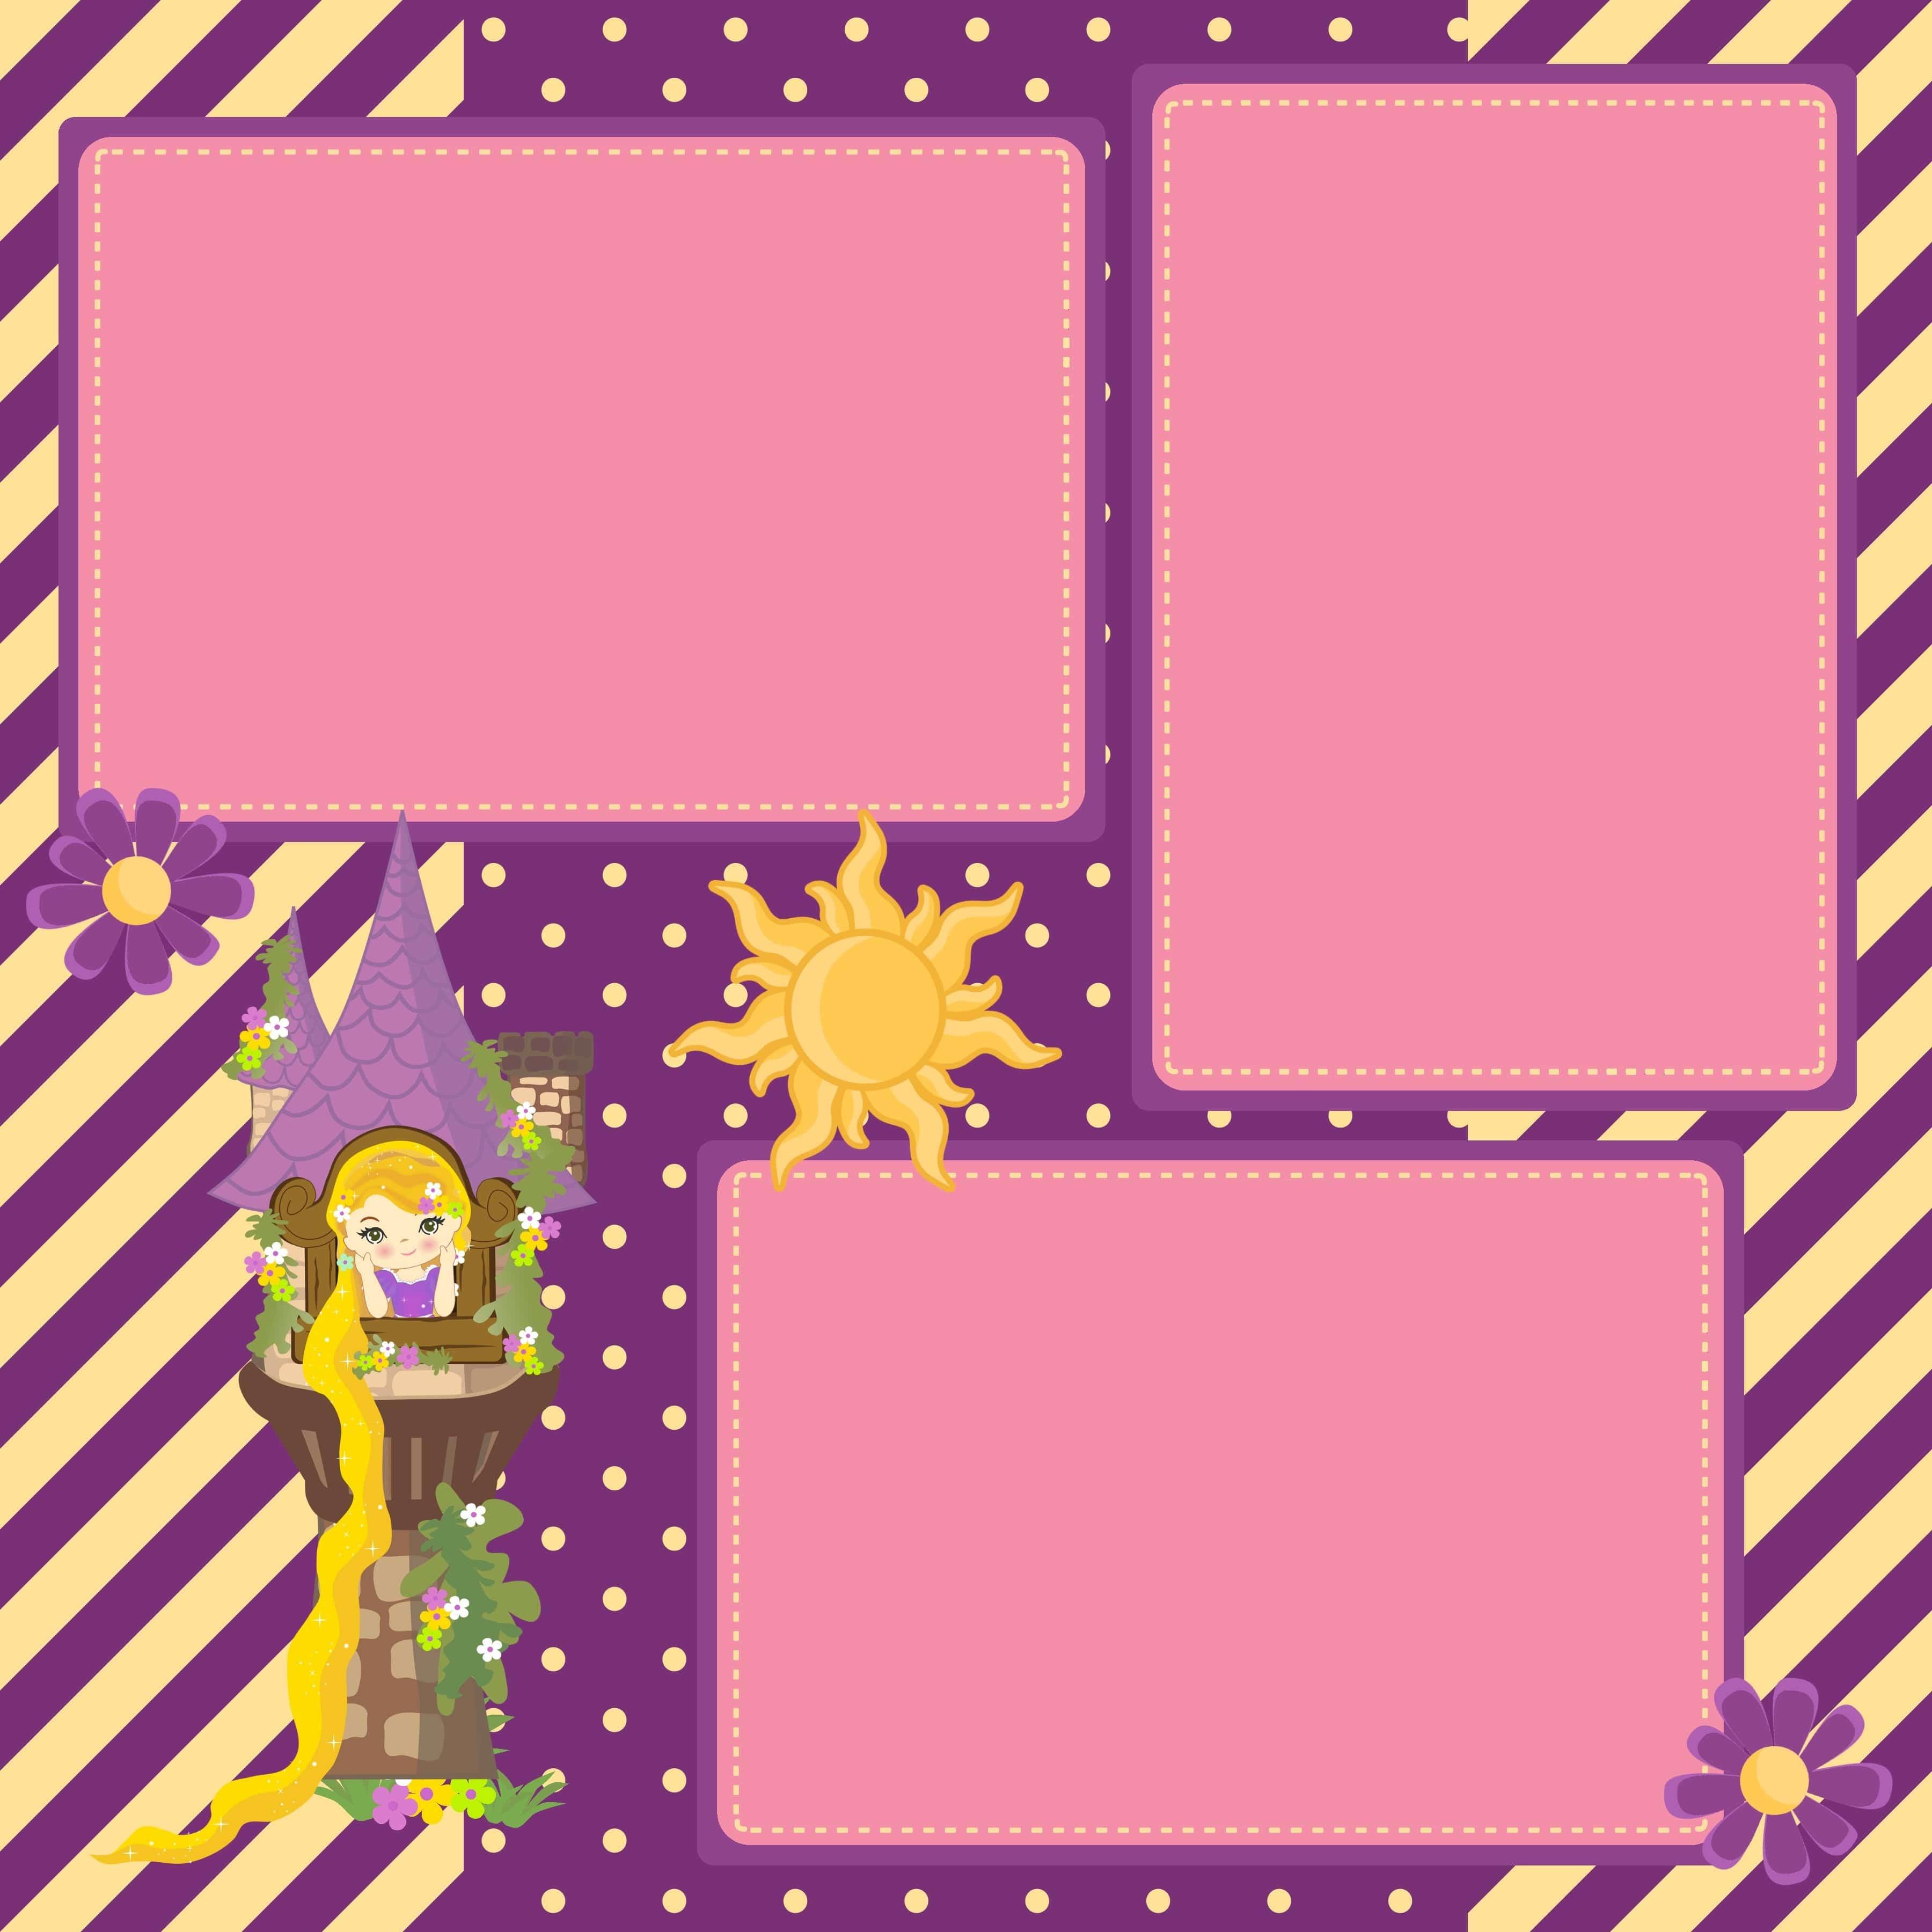 Rapunzel (2) - 12 x 12 Premade, Printed Scrapbook Pages by SSC Designs - Scrapbook Supply Companies